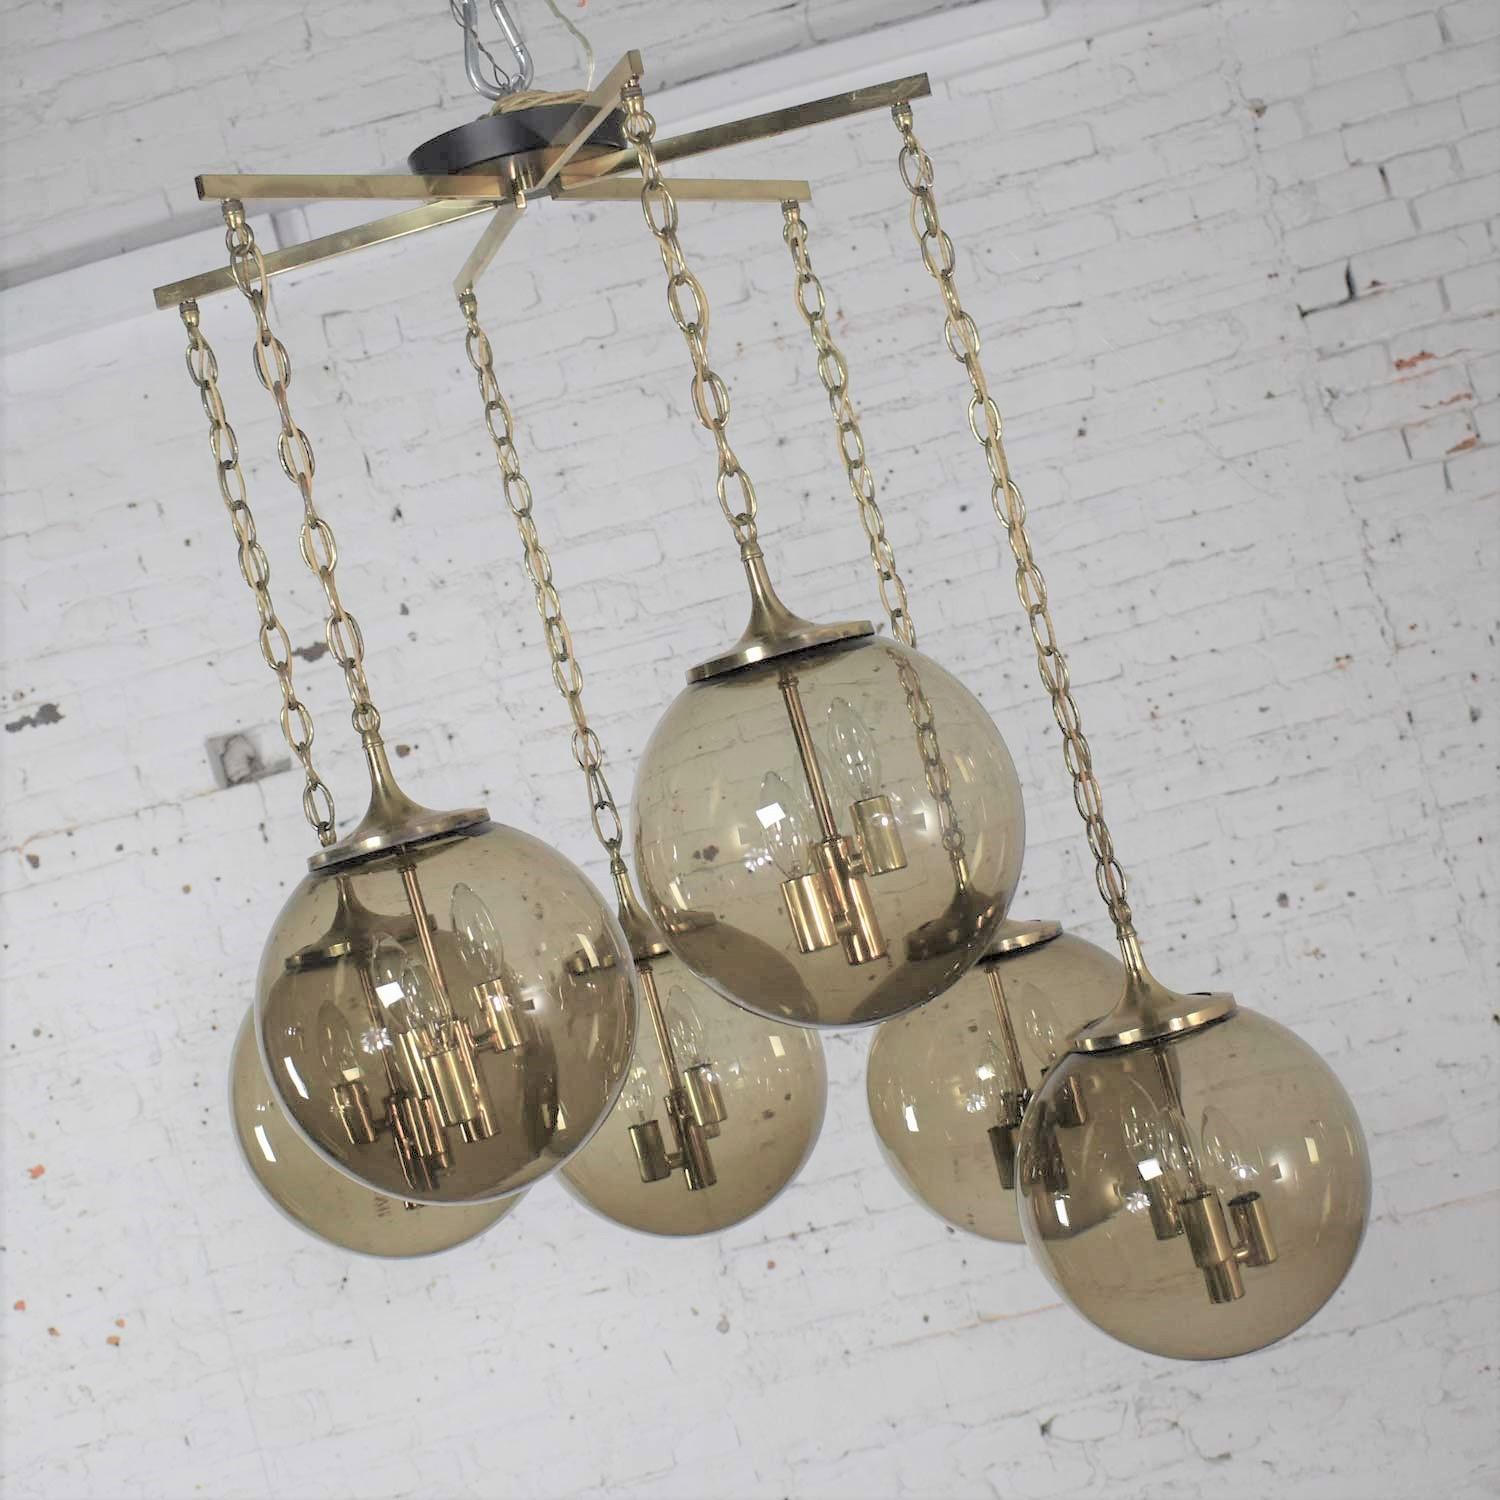 Incredible Lightcraft of California Mid-Century Modern black and brass chandelier or ceiling light with 6 cascading smoke glass orb shaped globes of equal size and brass star canopy. It is in fabulous vintage condition. The brass has been cleaned